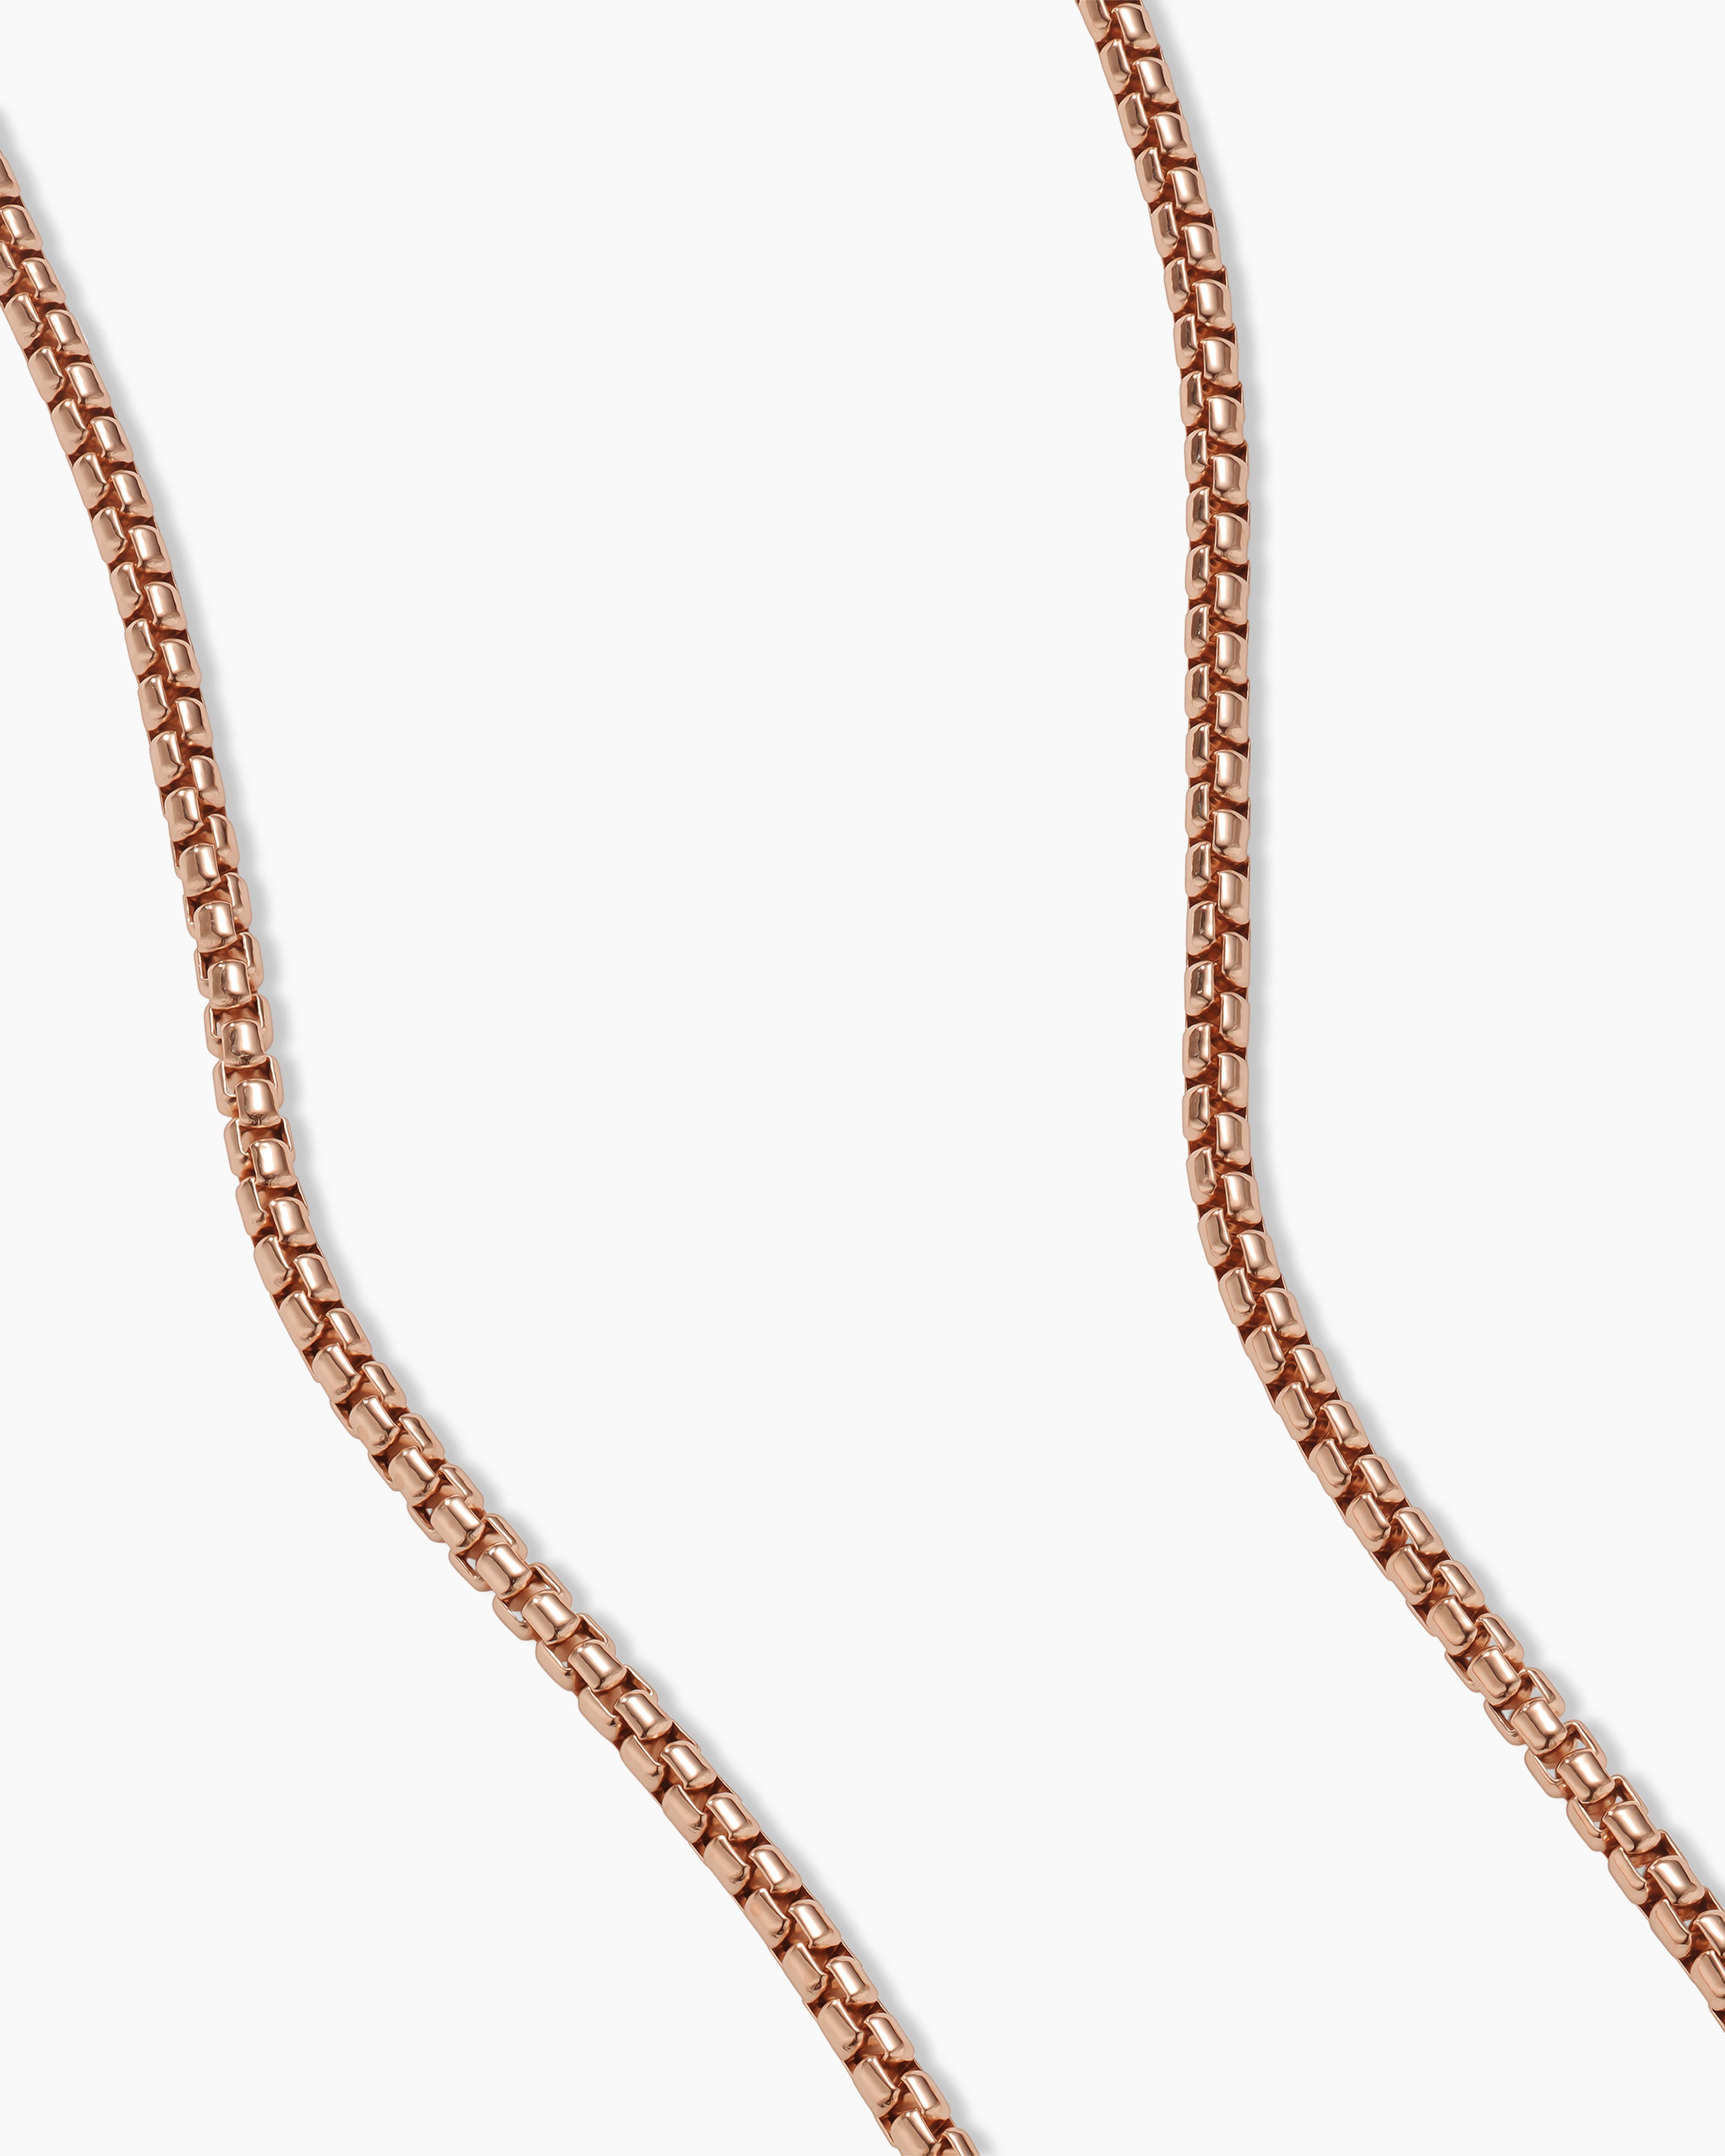 5 Gold Snake Chain Necklaces You Need In Your Jewelry Box